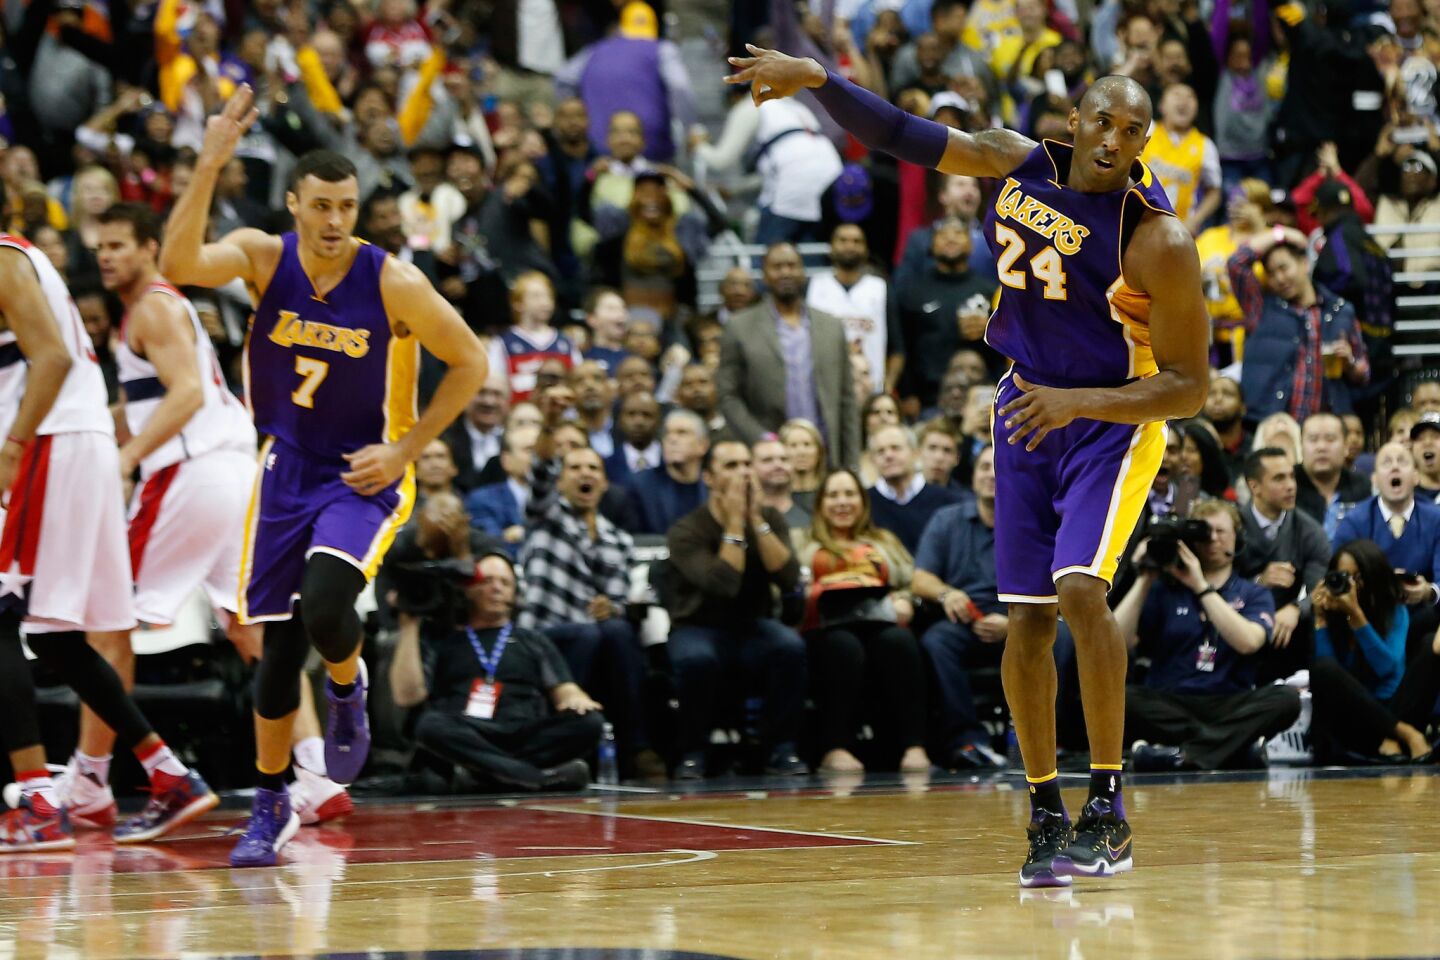 Kobe Bryant has 31 points in the Lakers' win over Wizards